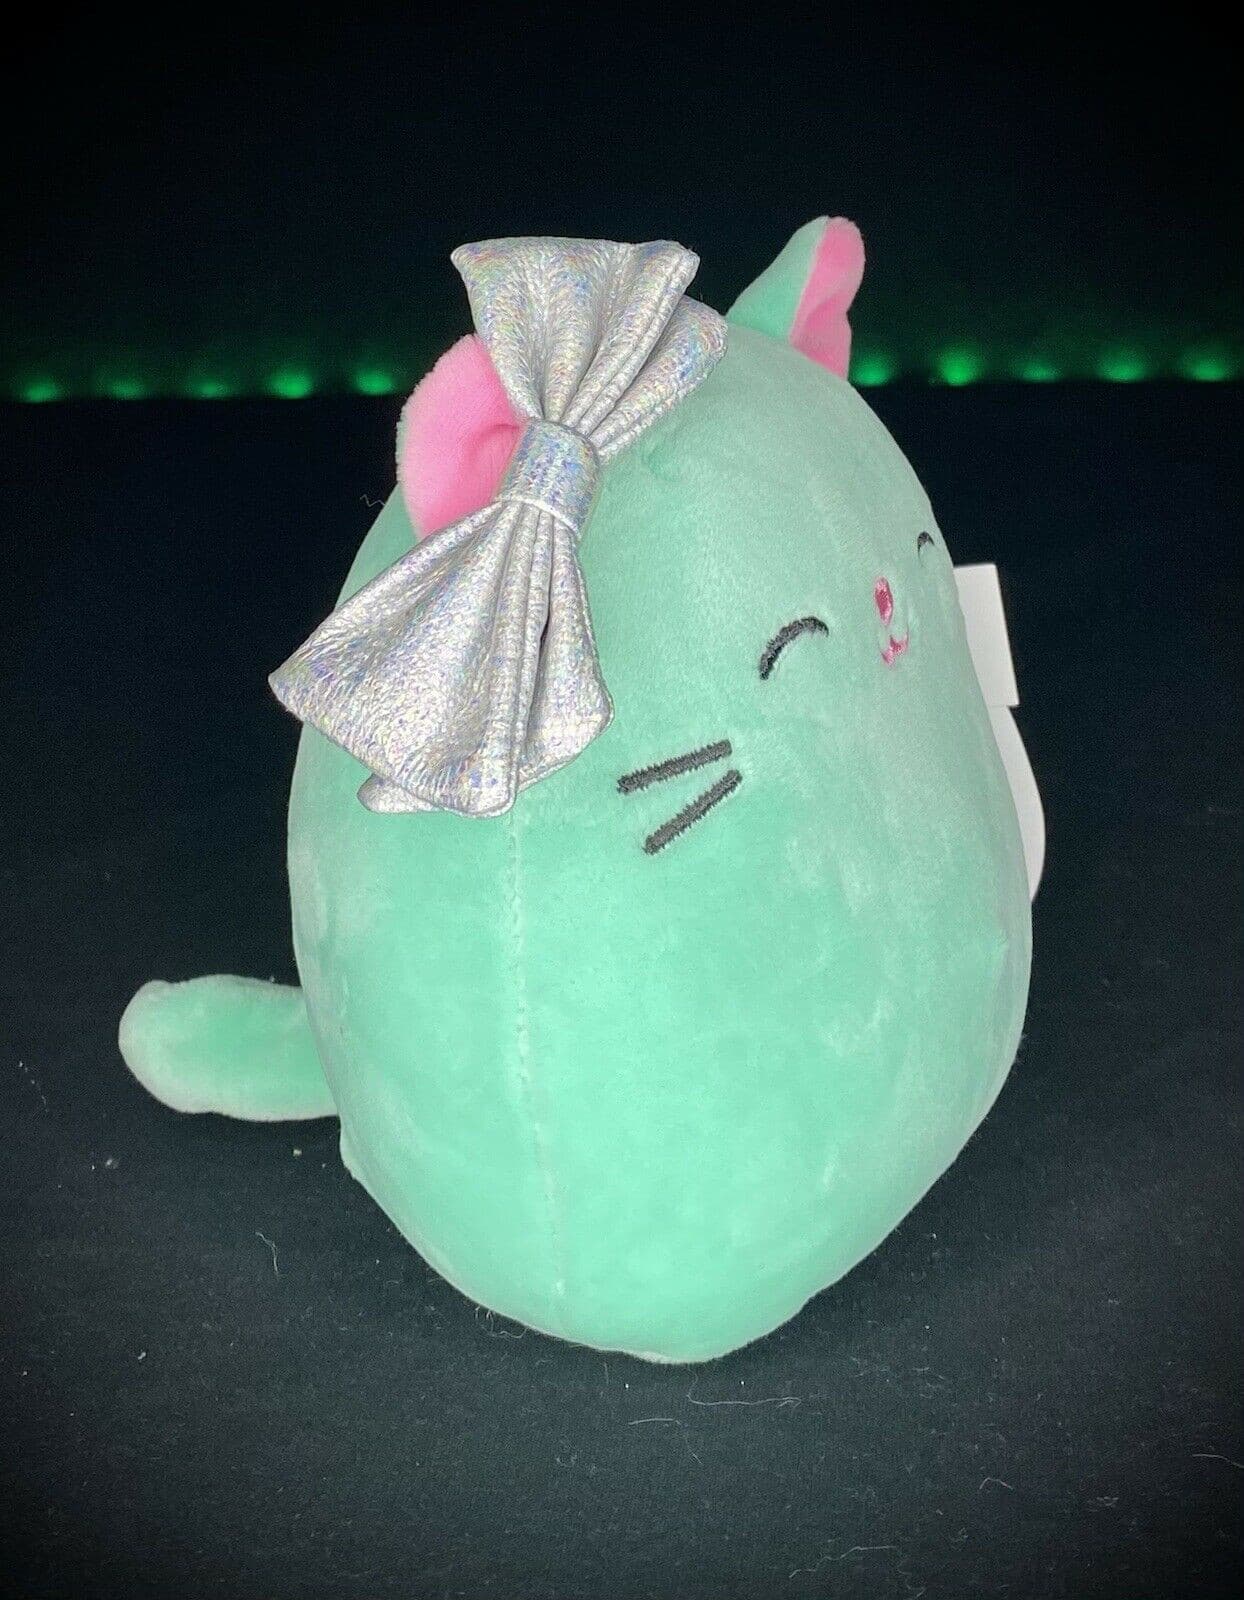 Squishmallow Charisma The Cat 5” Kellytoy Stuffed Animal *CLAIRE’S EXCLUSIVE* | Sweet Magnolia Charms.